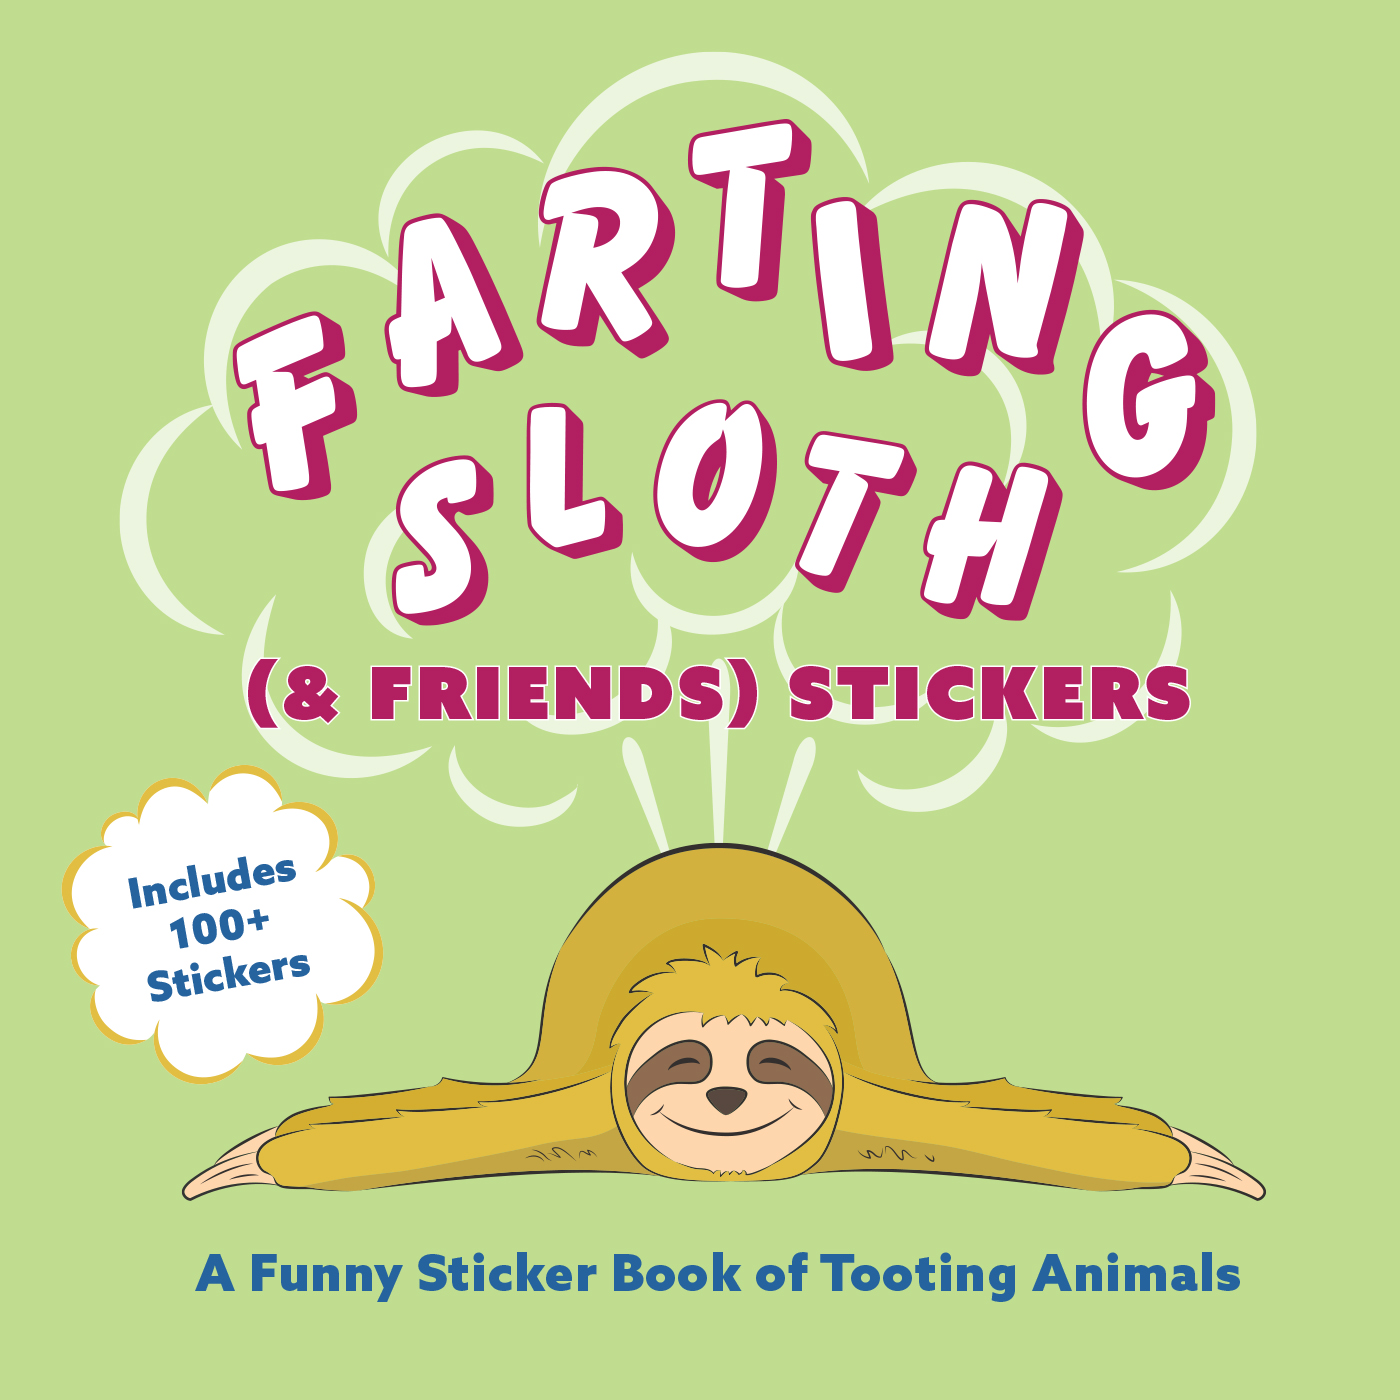 Farting Sloth Stickers